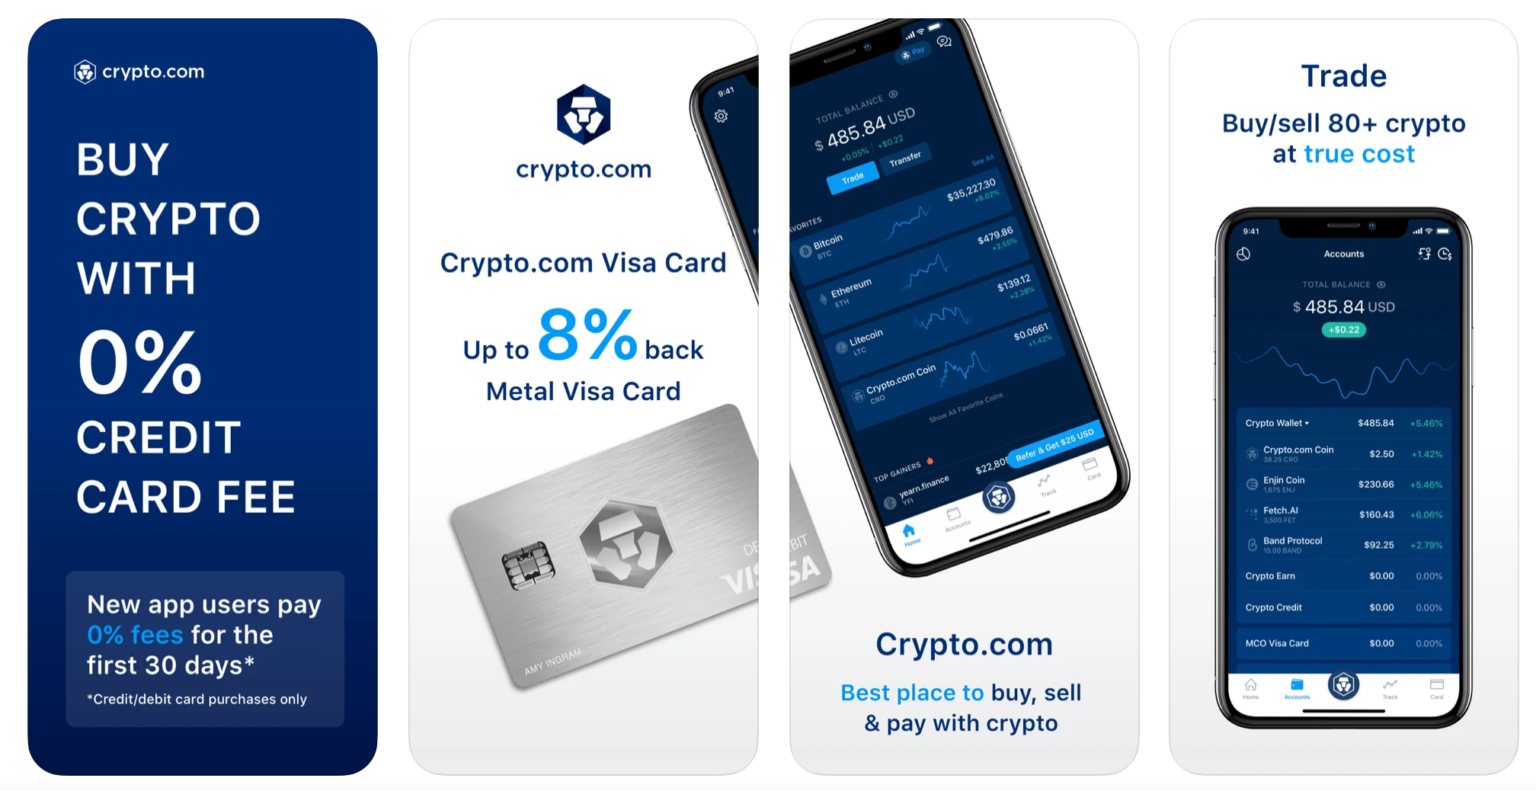 what can i buy with crypto.com